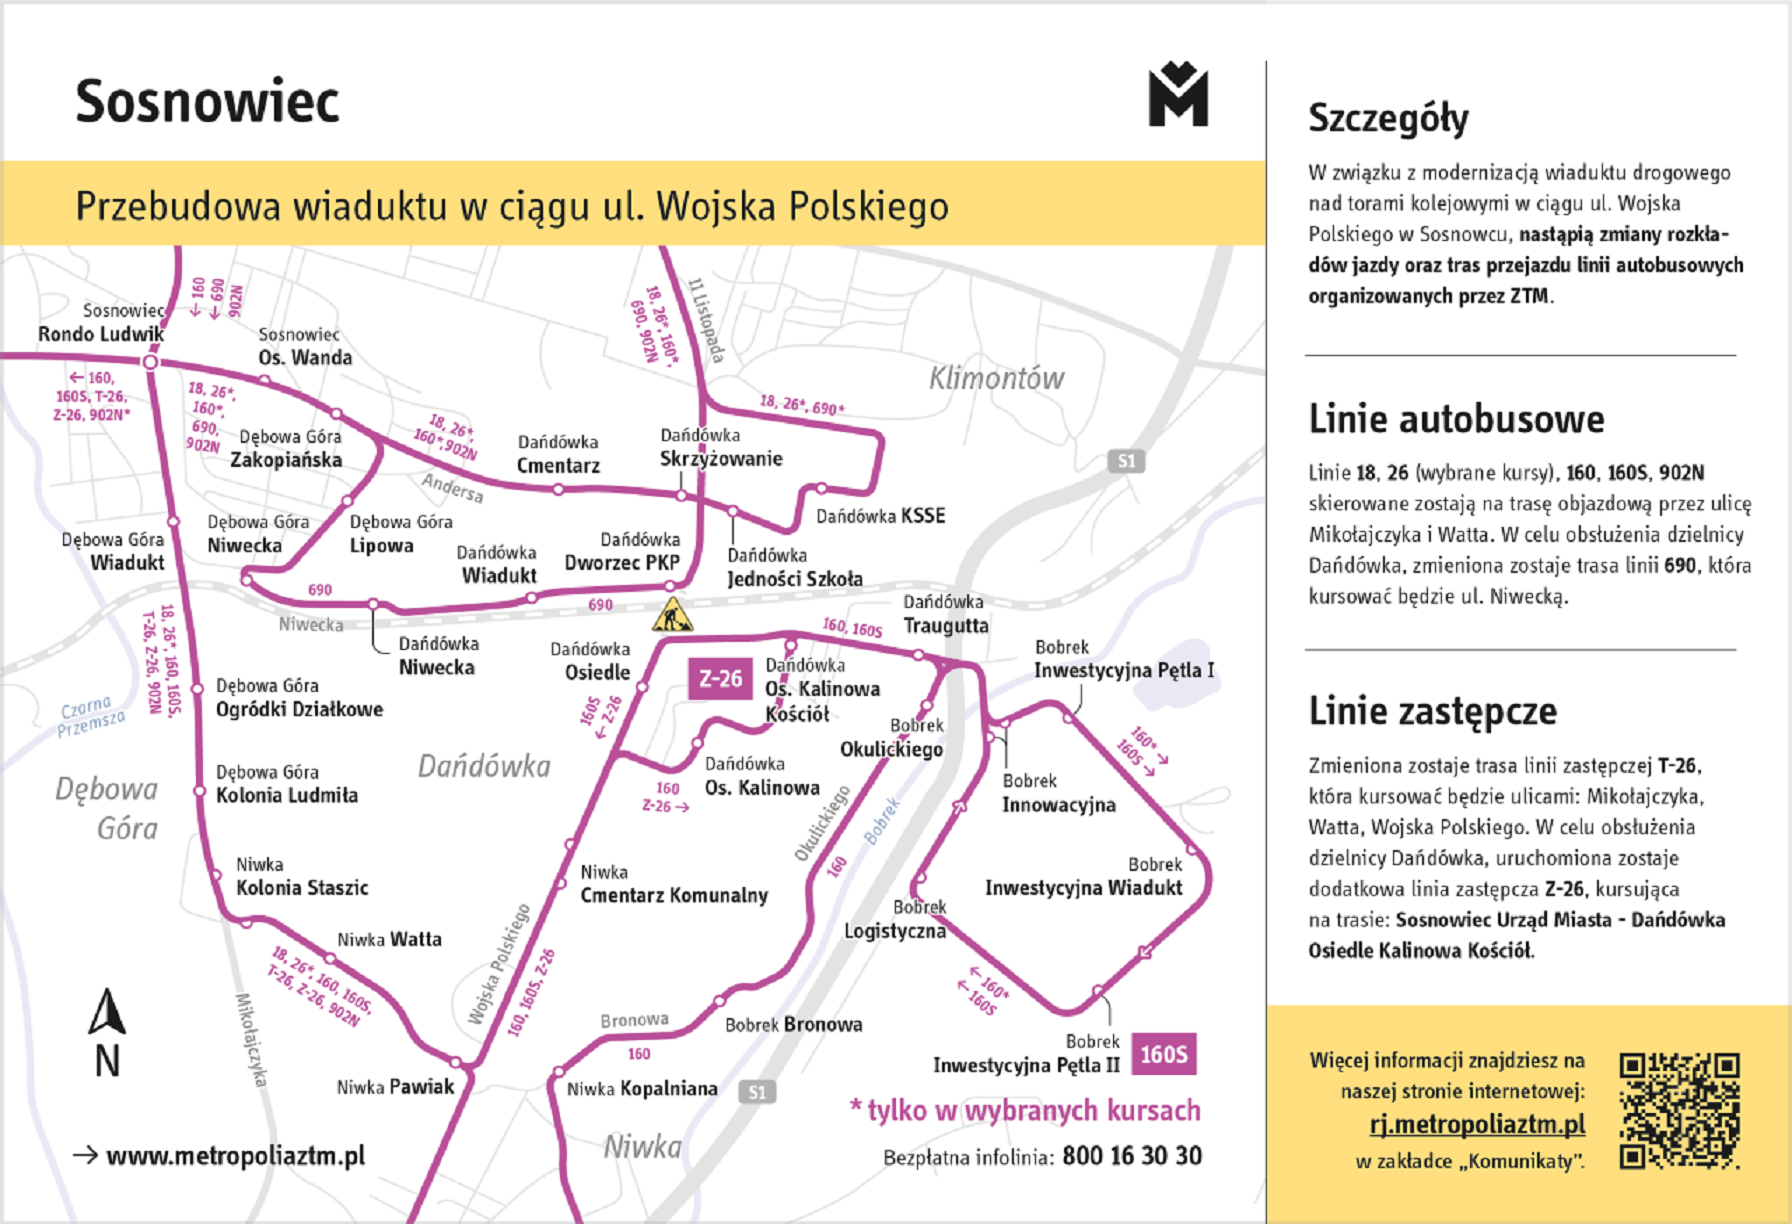 Artwork of the article The Wojska Polskiego street closed and changes in the urban transport